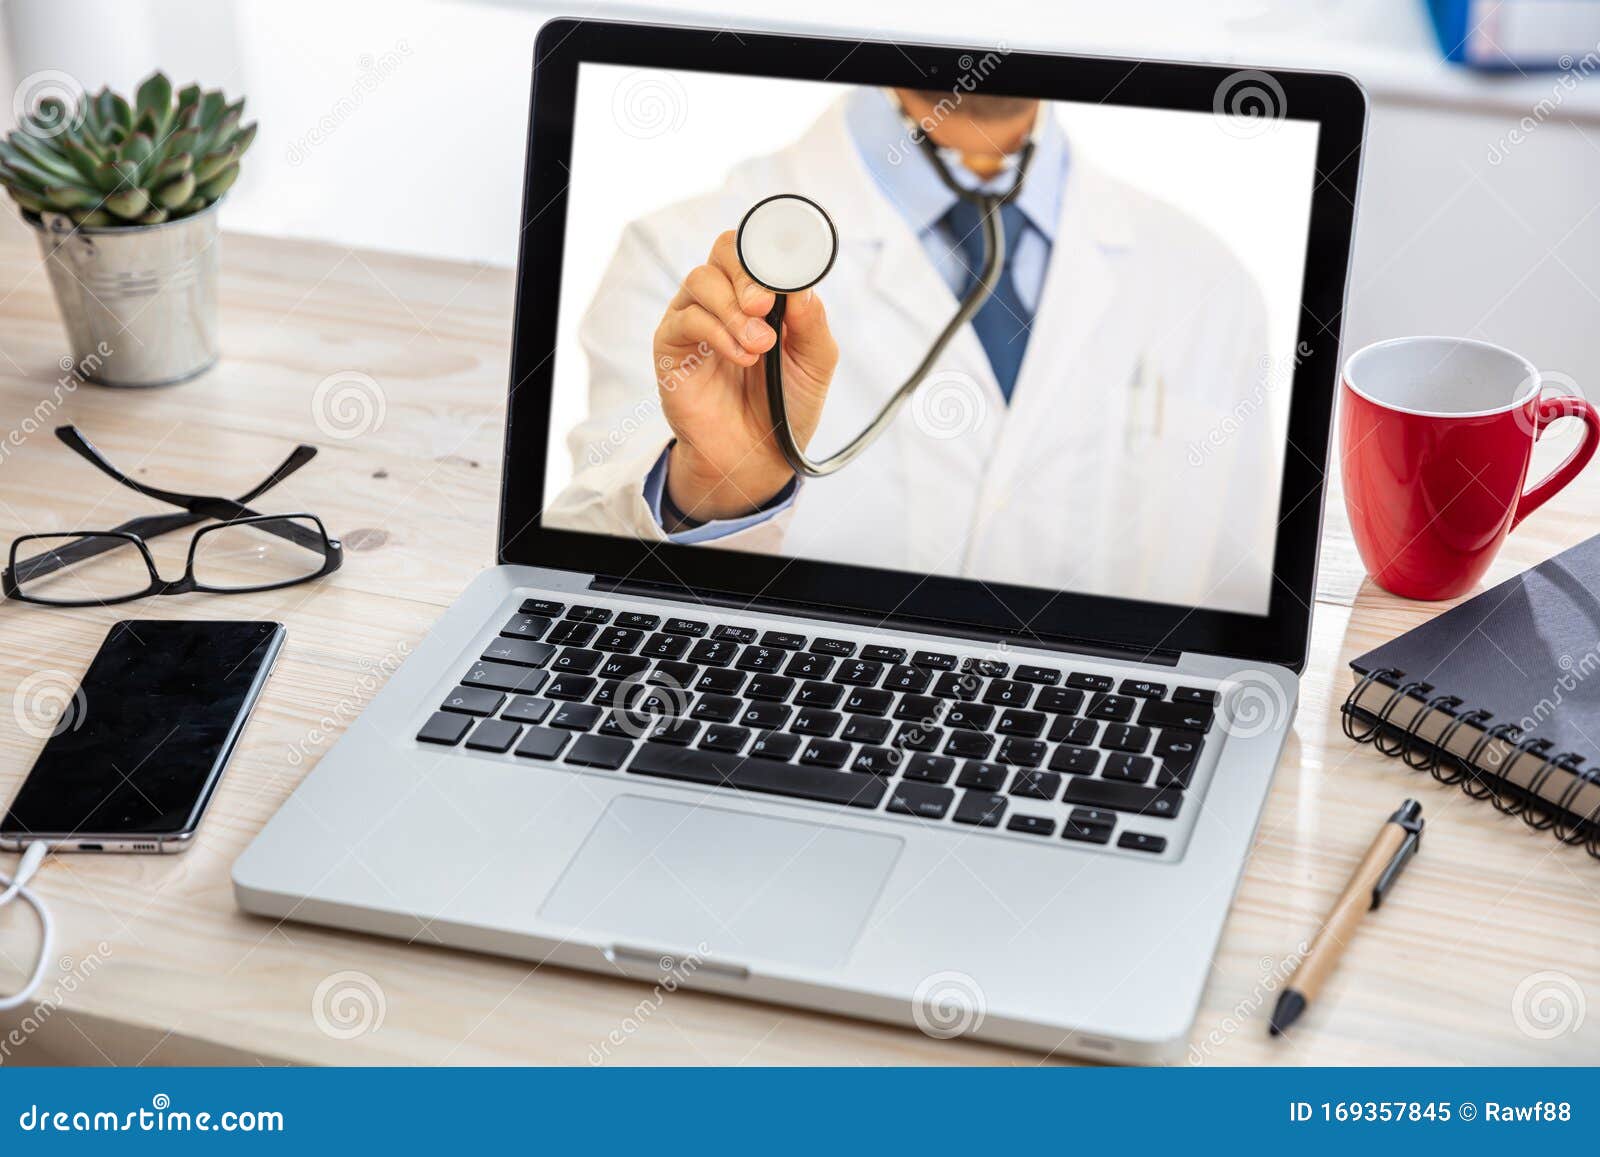 telemedicine concept. doctor gp on a computer screen, office desk background